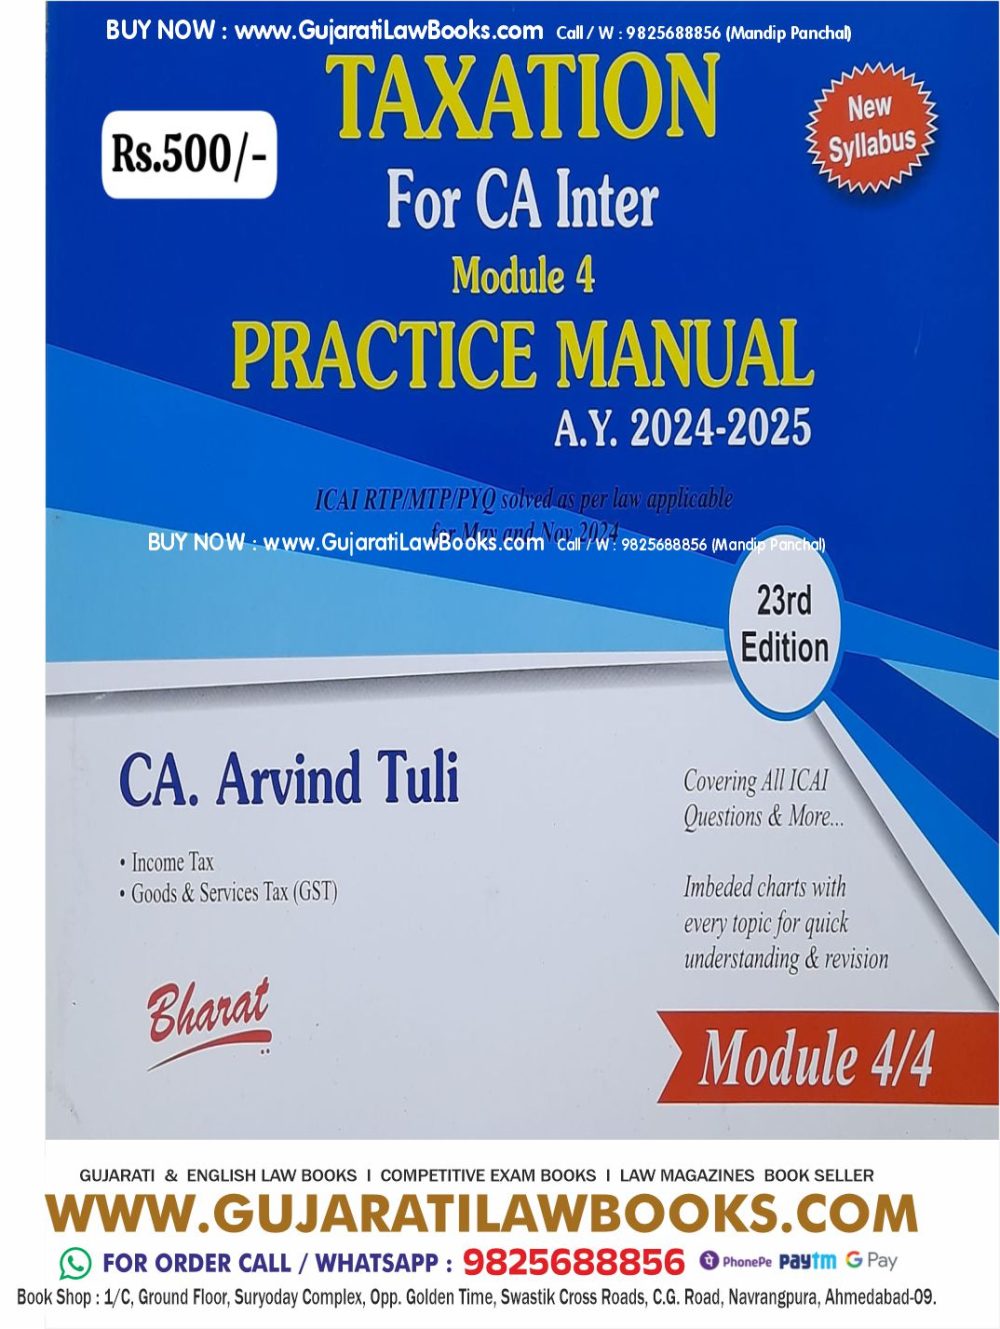 TAXATION for CA Inter Module 4 PRACTICE MANUAL A Y 2024-2025 by CA Arvind Tuli Latest 23rd Edition Bharat